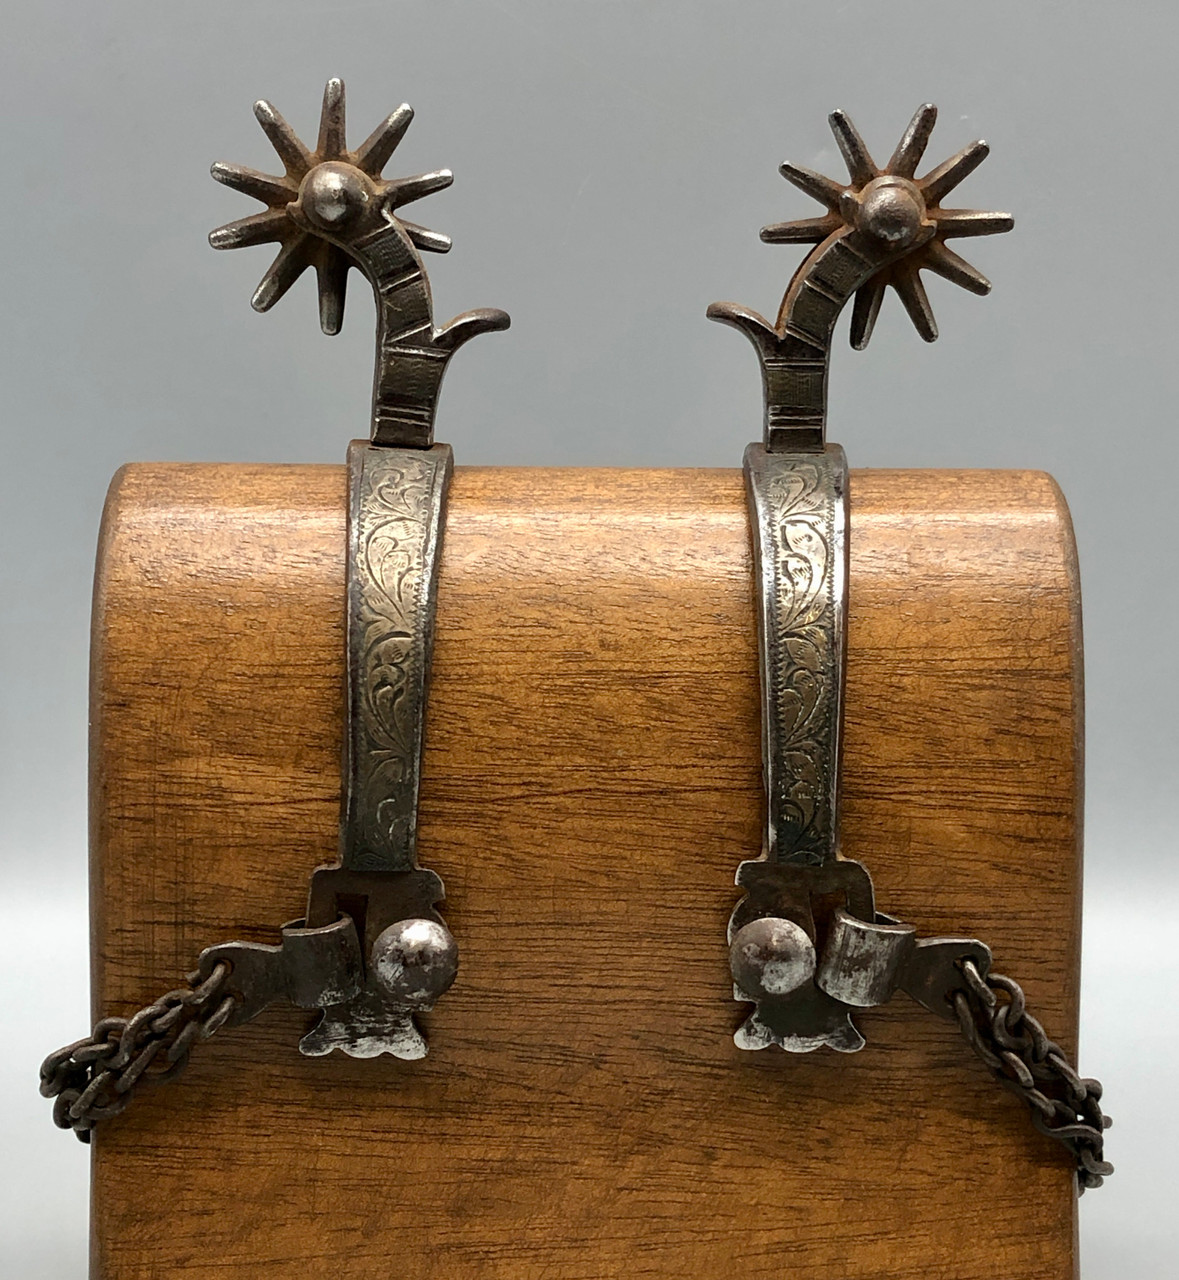 L.D. Stone Marked Spurs - $1,250